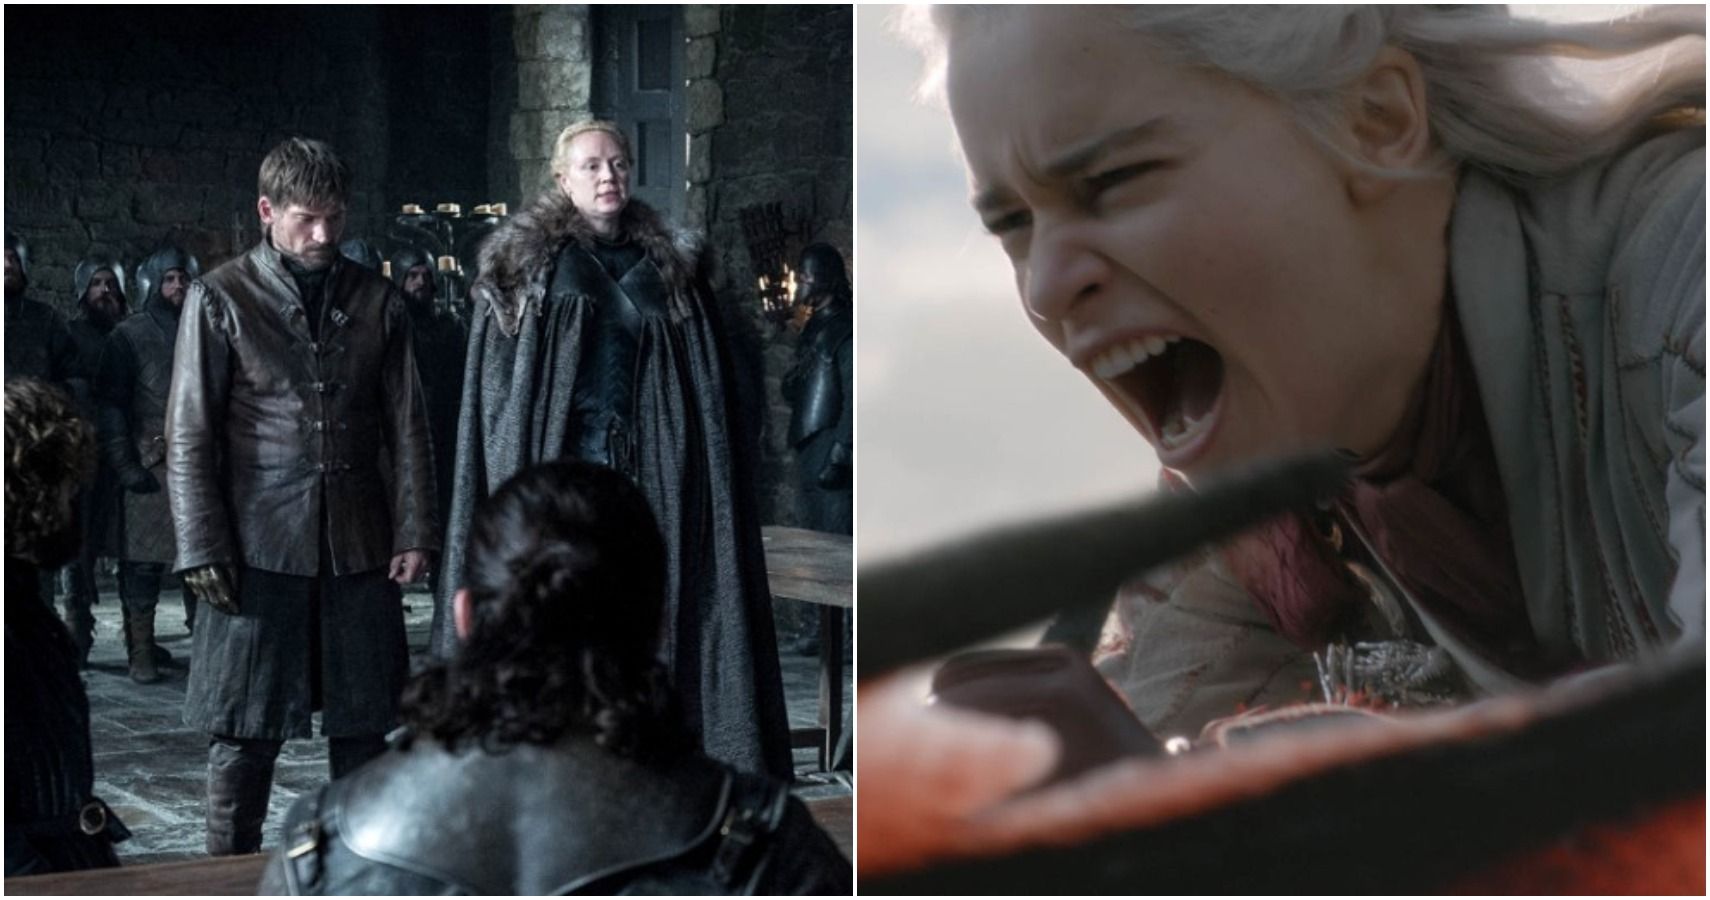 Ranking Every Episode Of Got Season 8 From Worst To Best